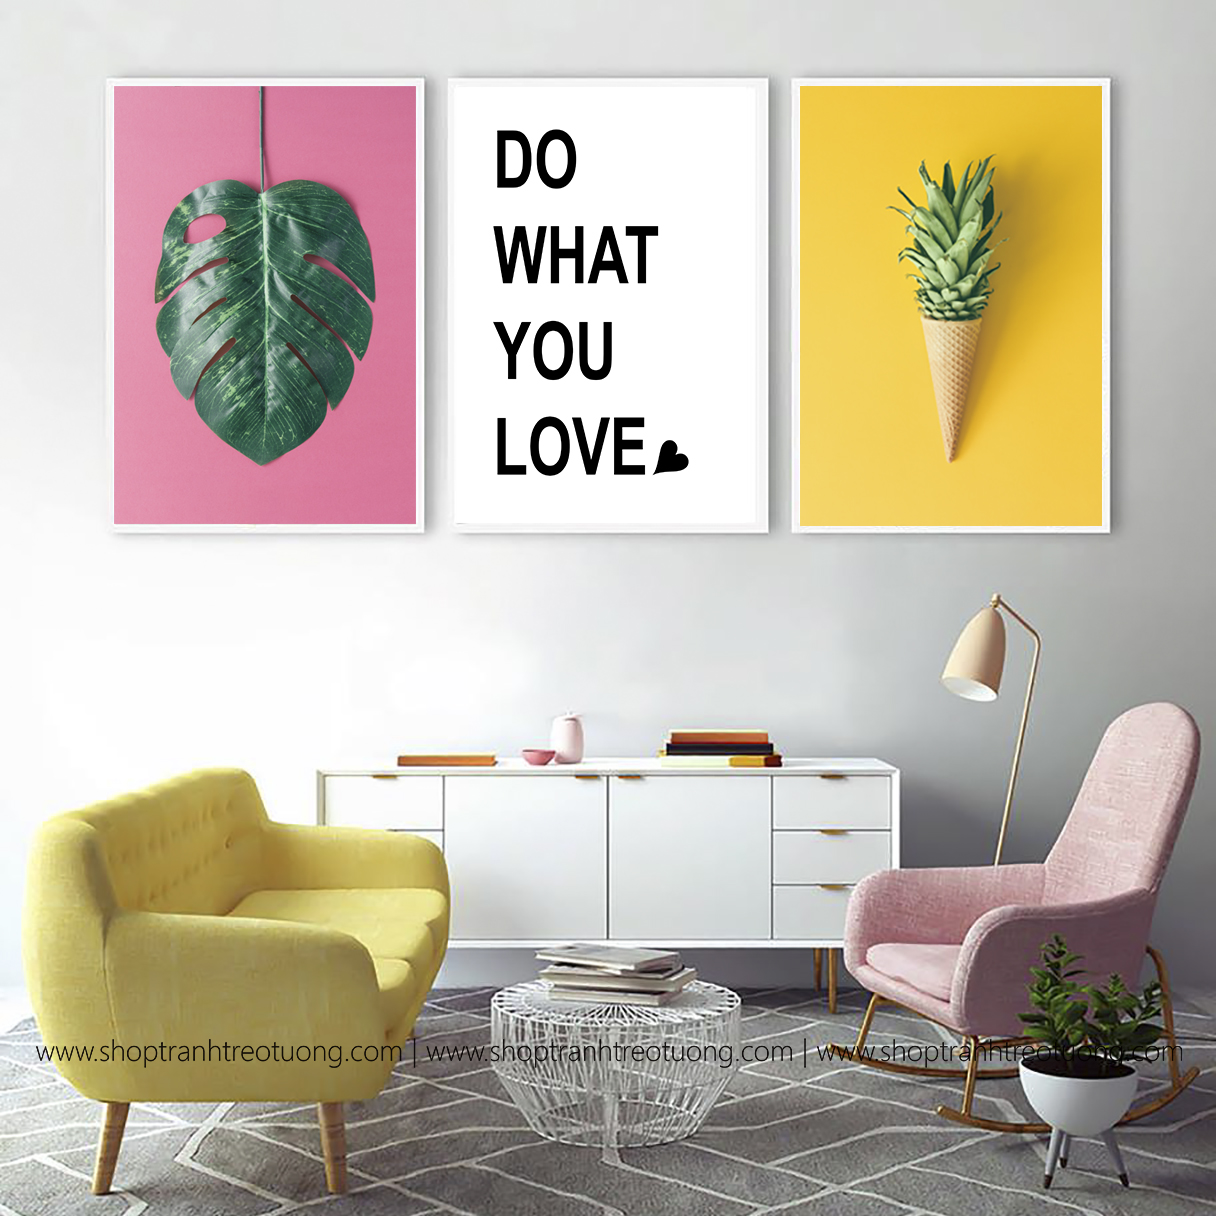 Tranh canvas: Do what you love